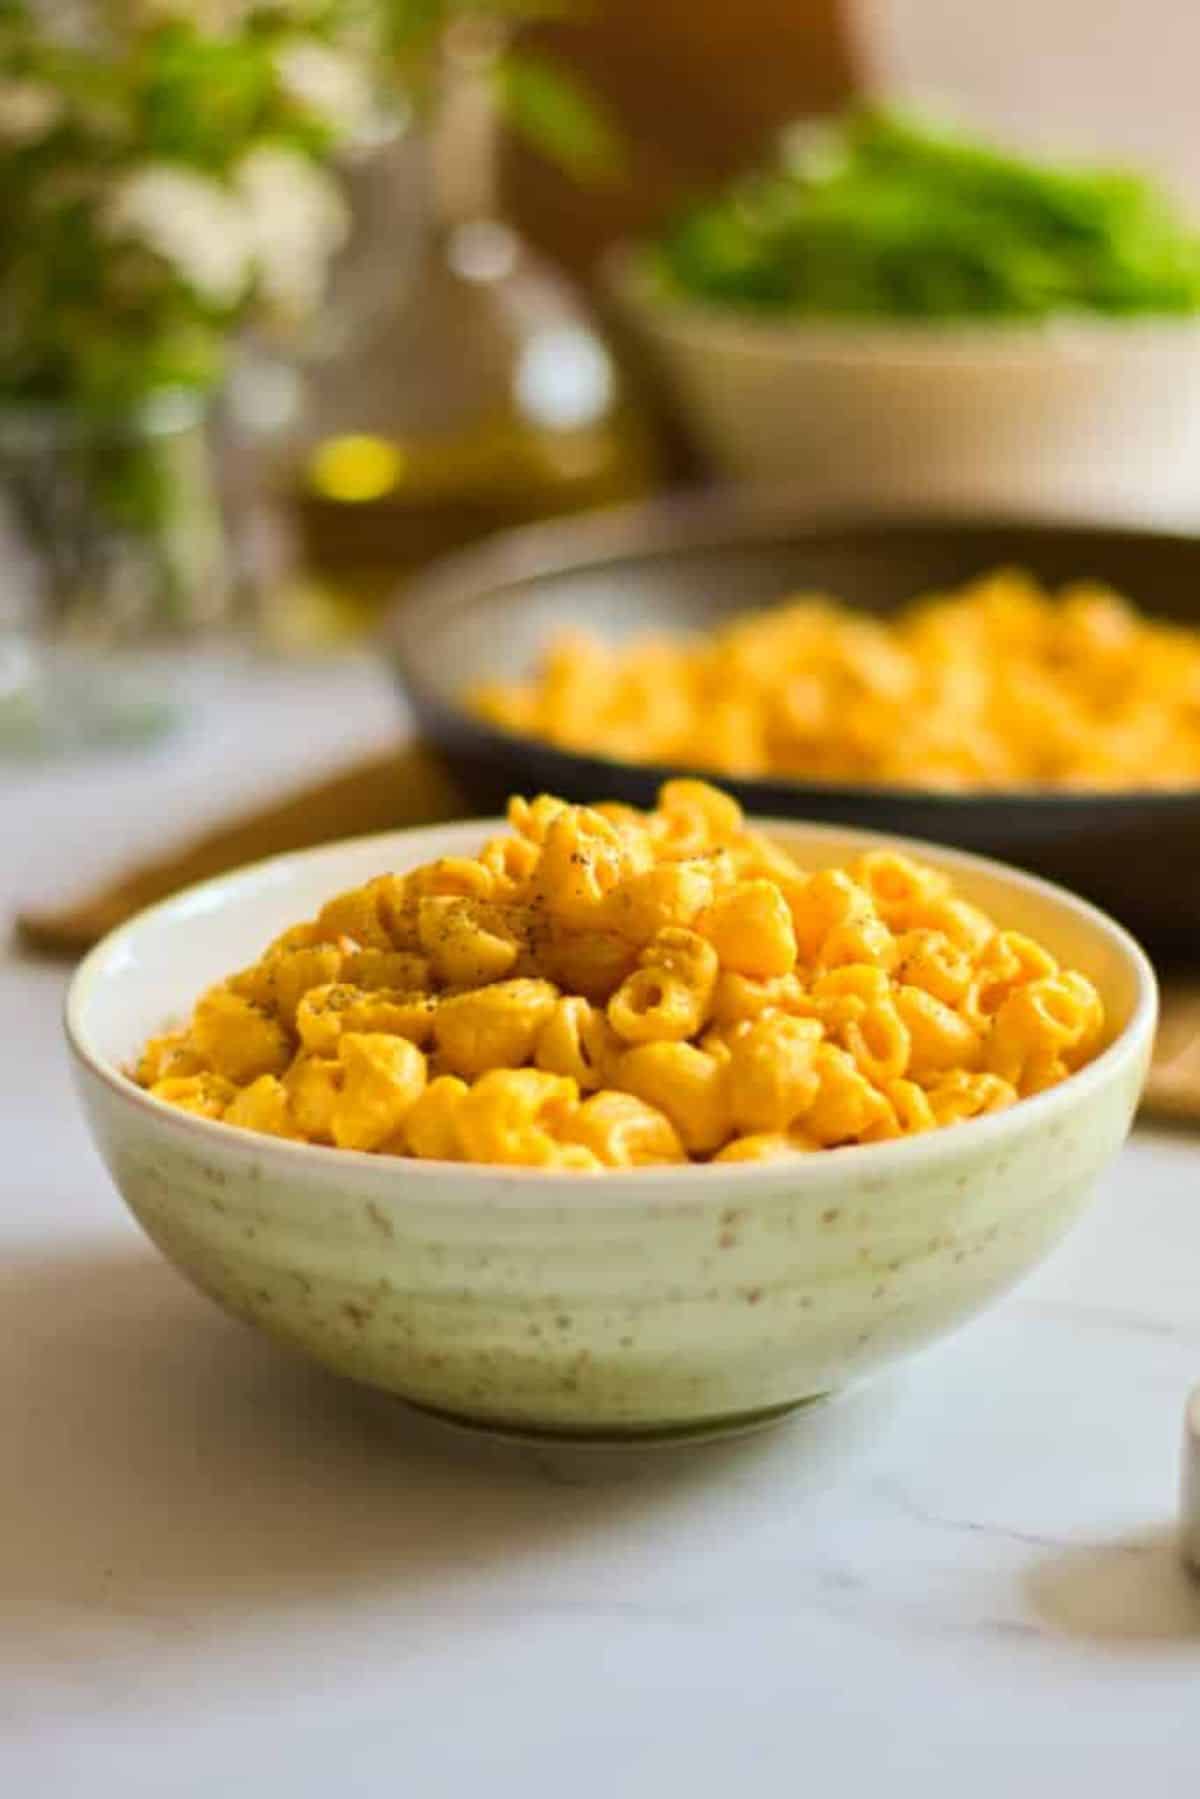 Delicious Gluten-Free Vegan Mac and Cheese in a bowl.